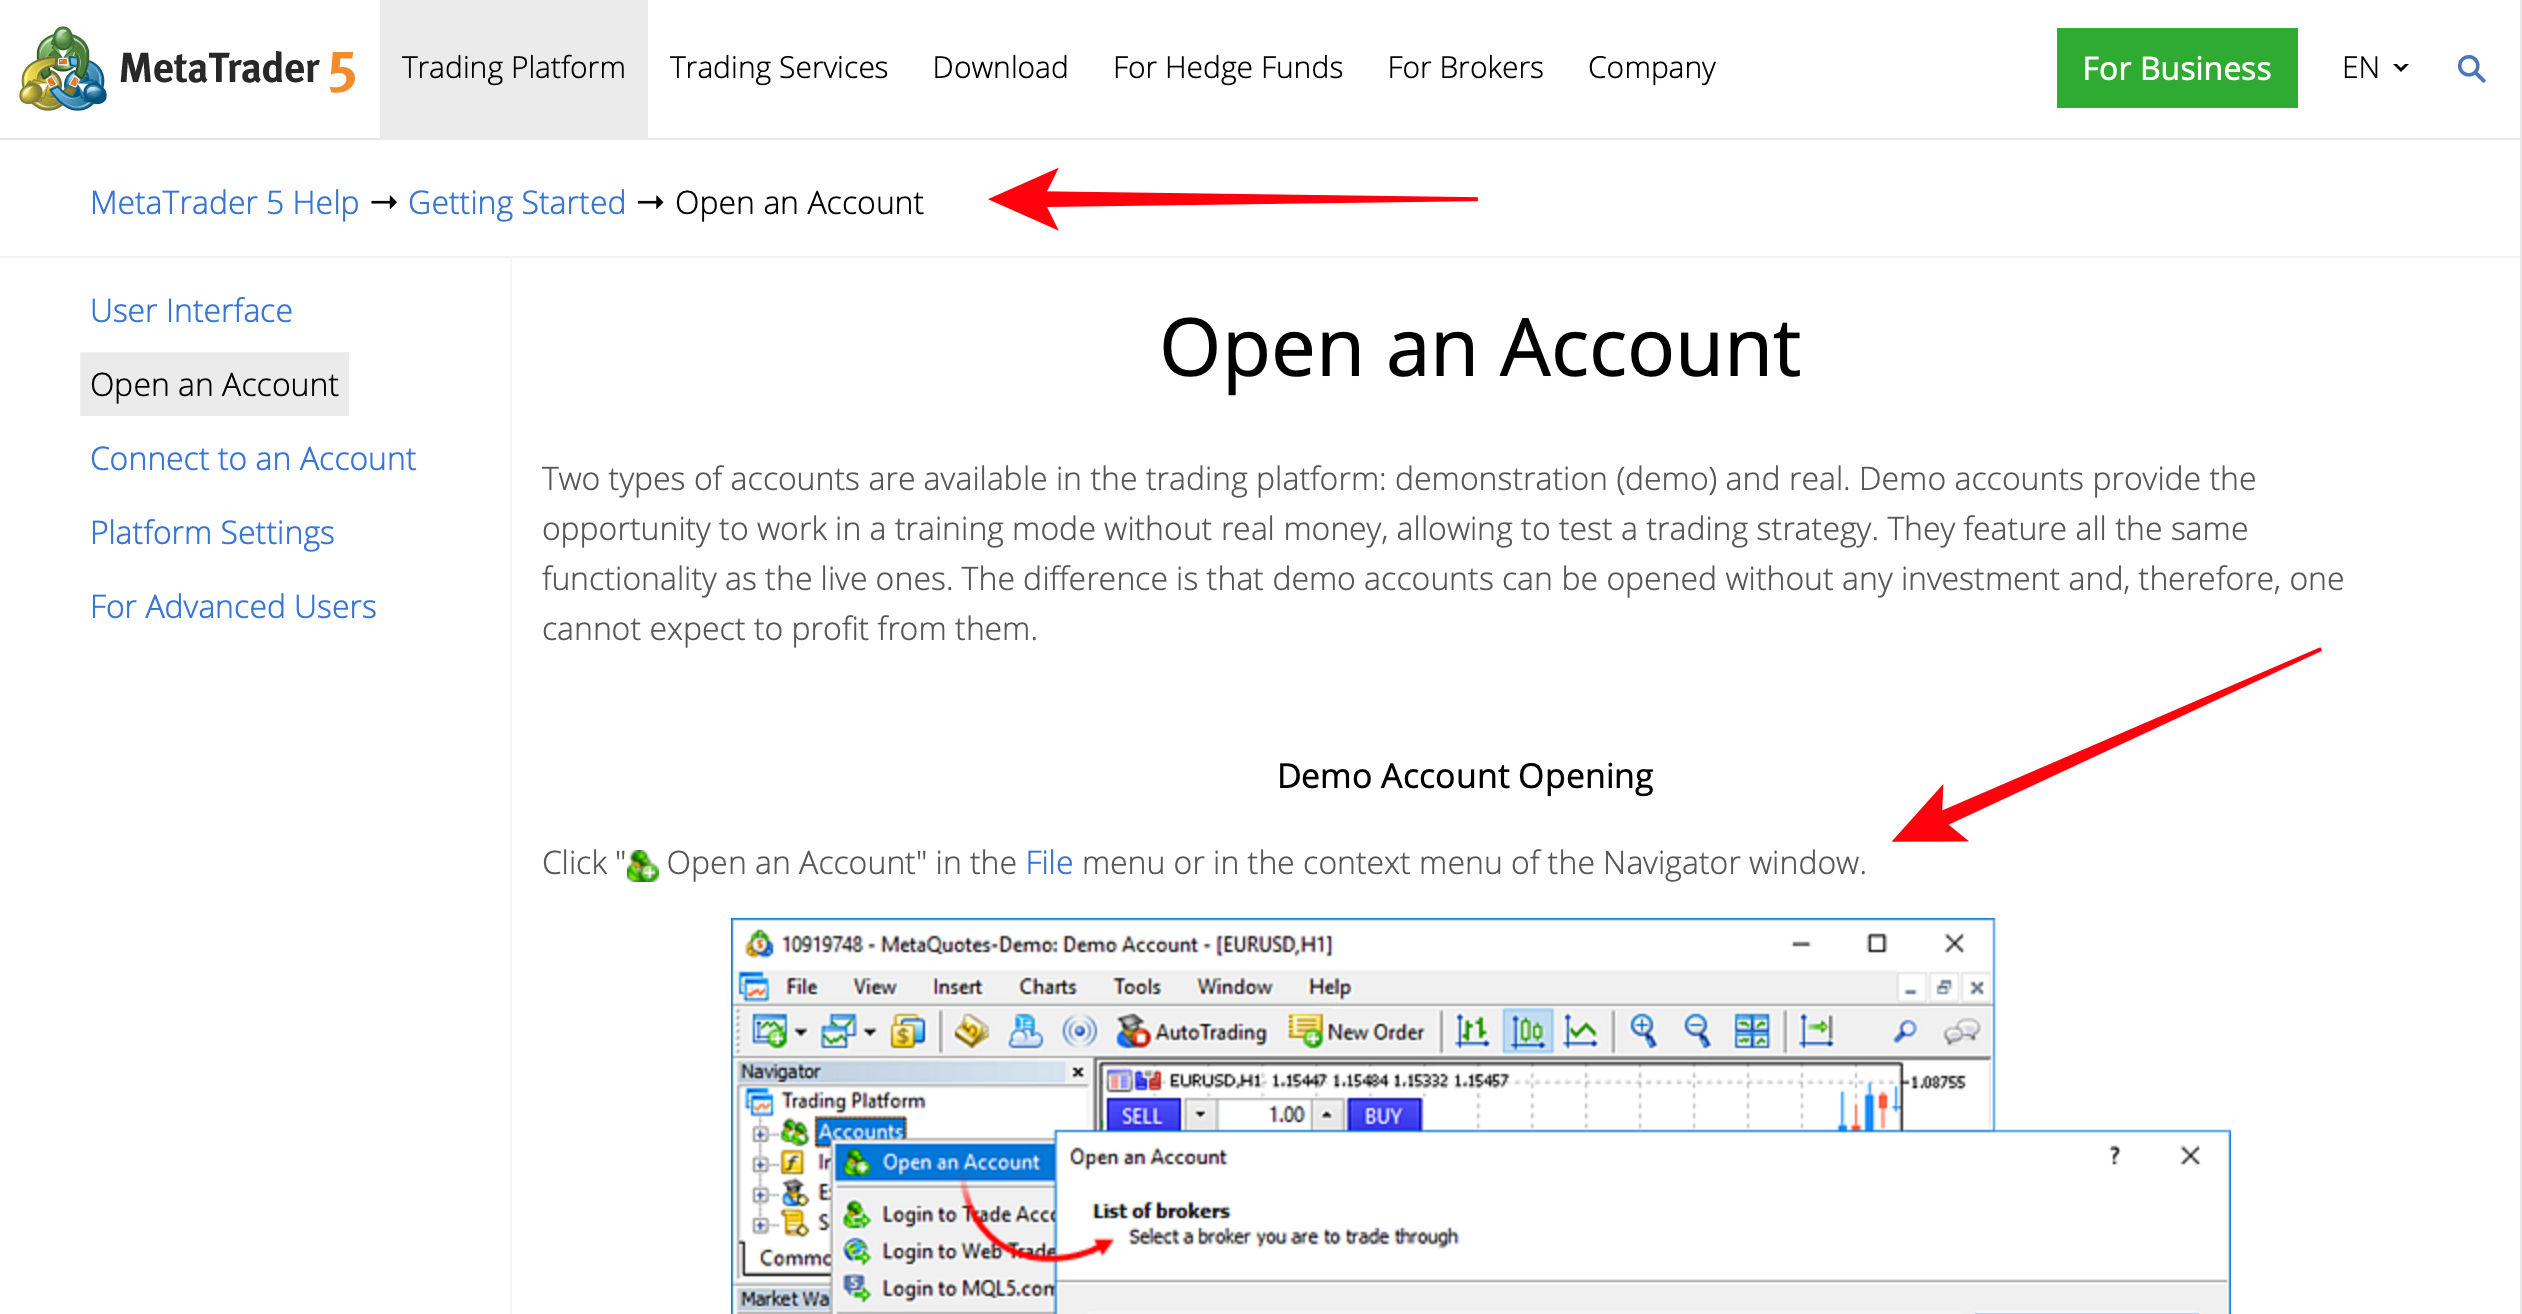 How to open an MetaTrader 5 account